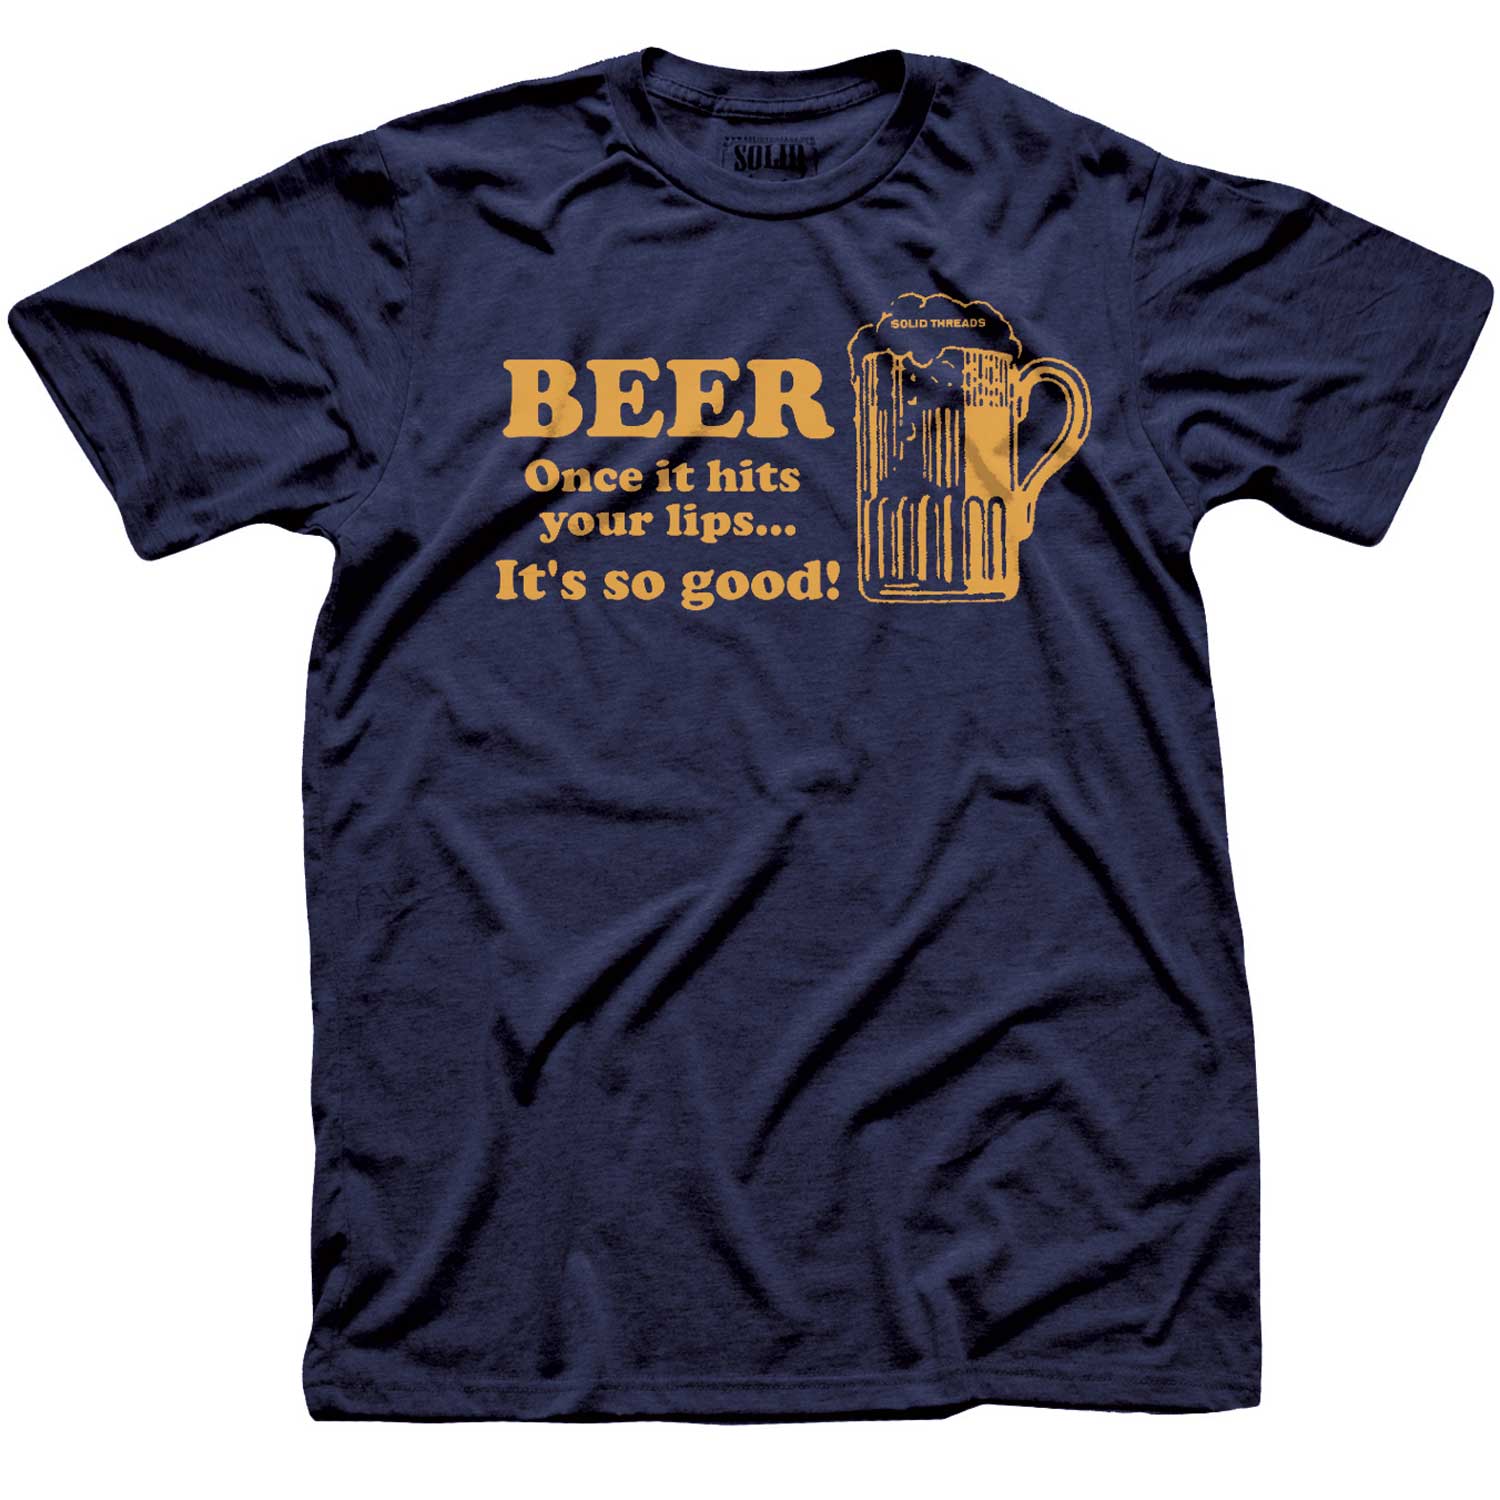 Men's Beer So Good When It Hits Your Lips T-shirt | Funny Old School Graphic Tee | Solid Threads